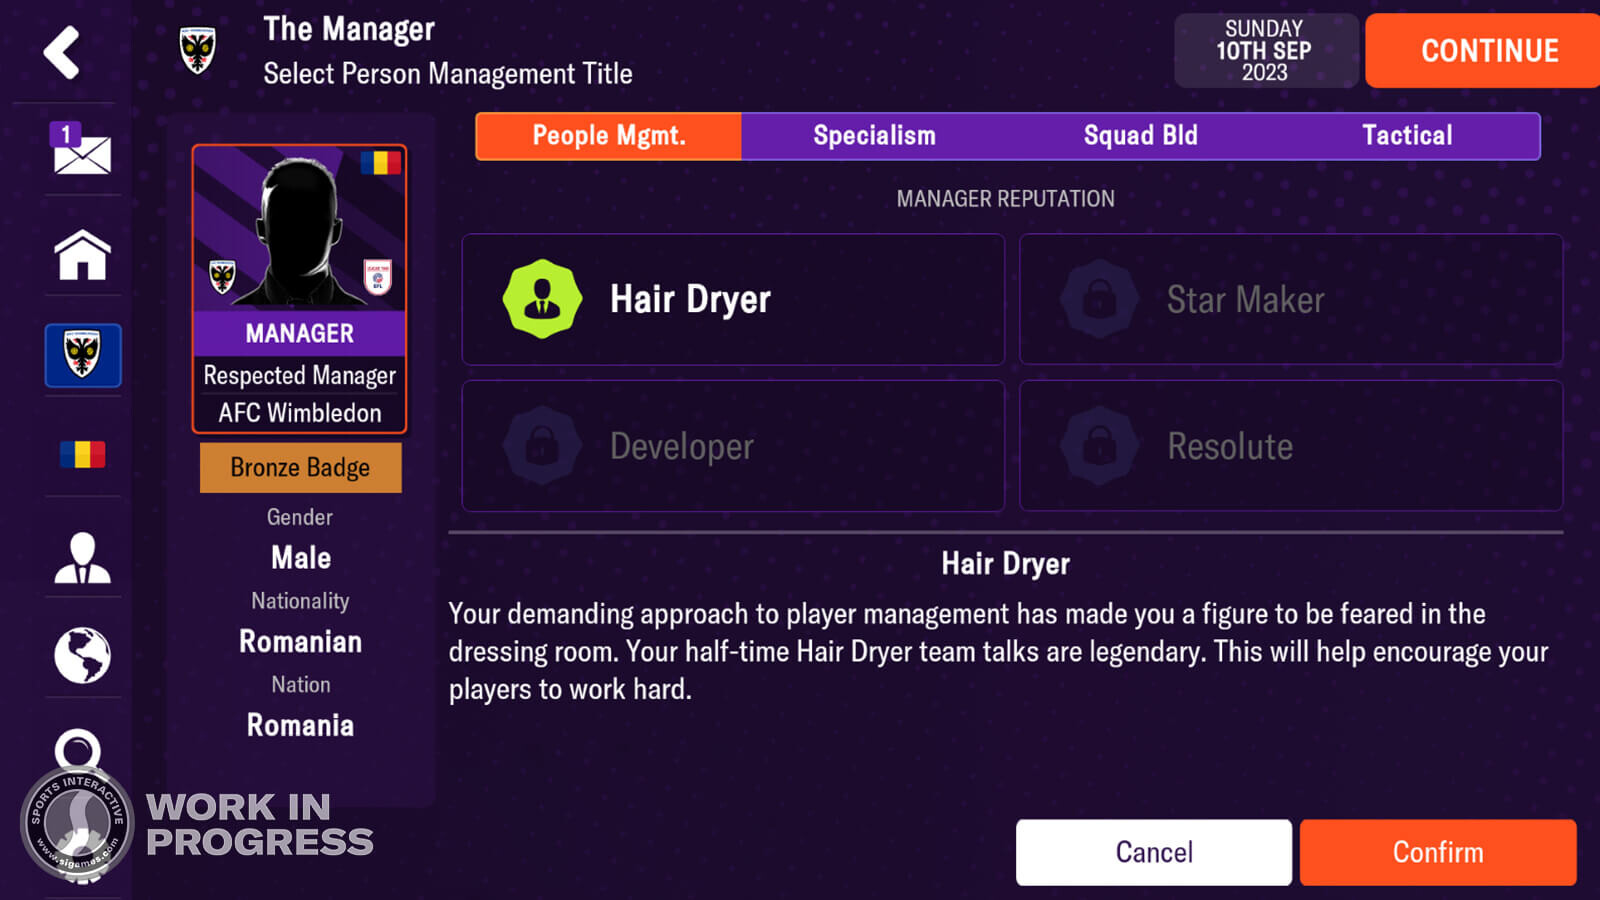 How to download Football Manager 2024 Mobile on Netflix Games